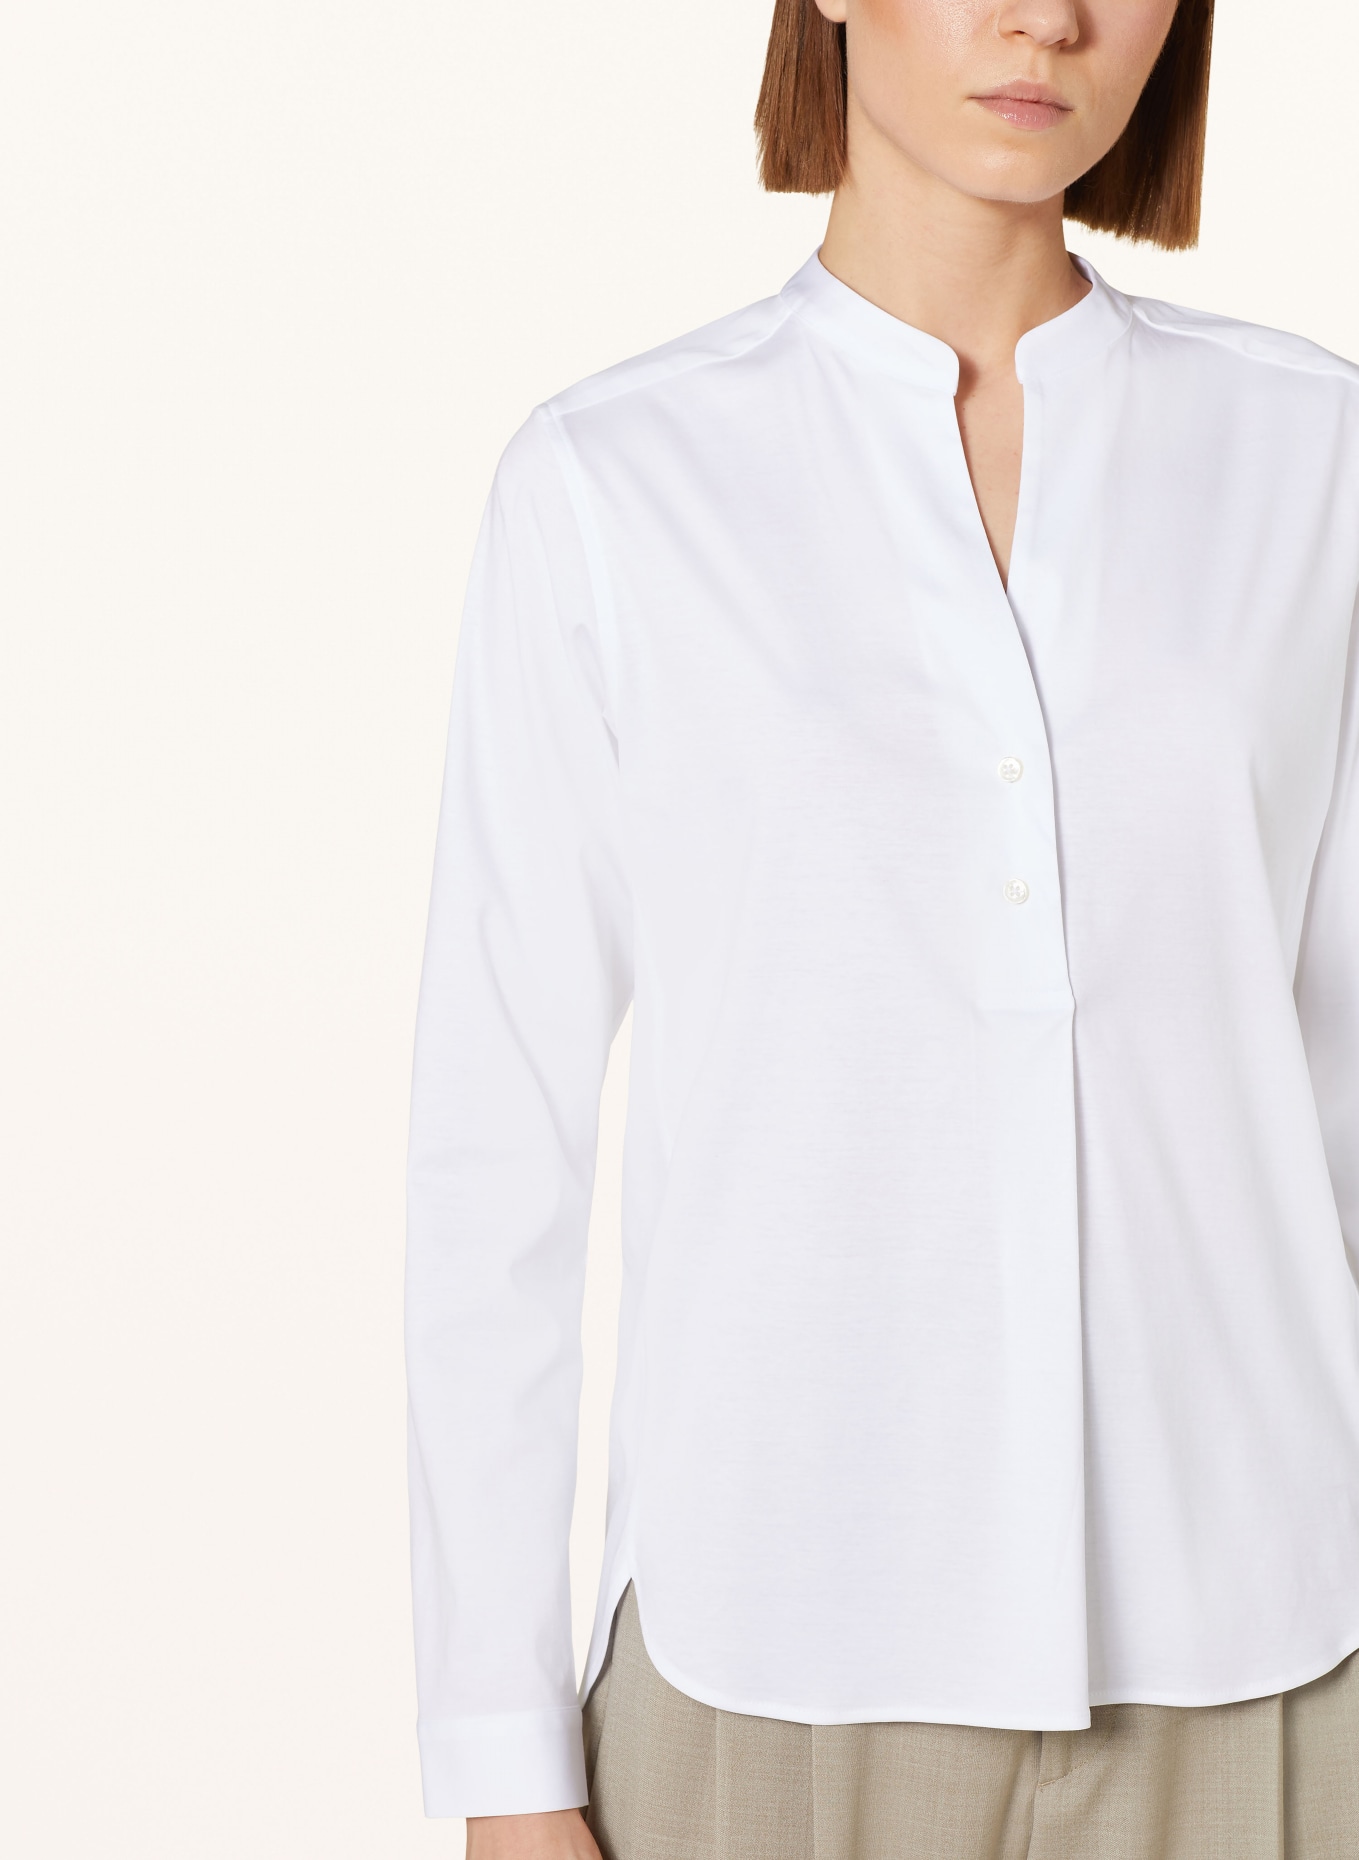 Soluzione Shirt blouse made of jersey, Color: WHITE (Image 4)